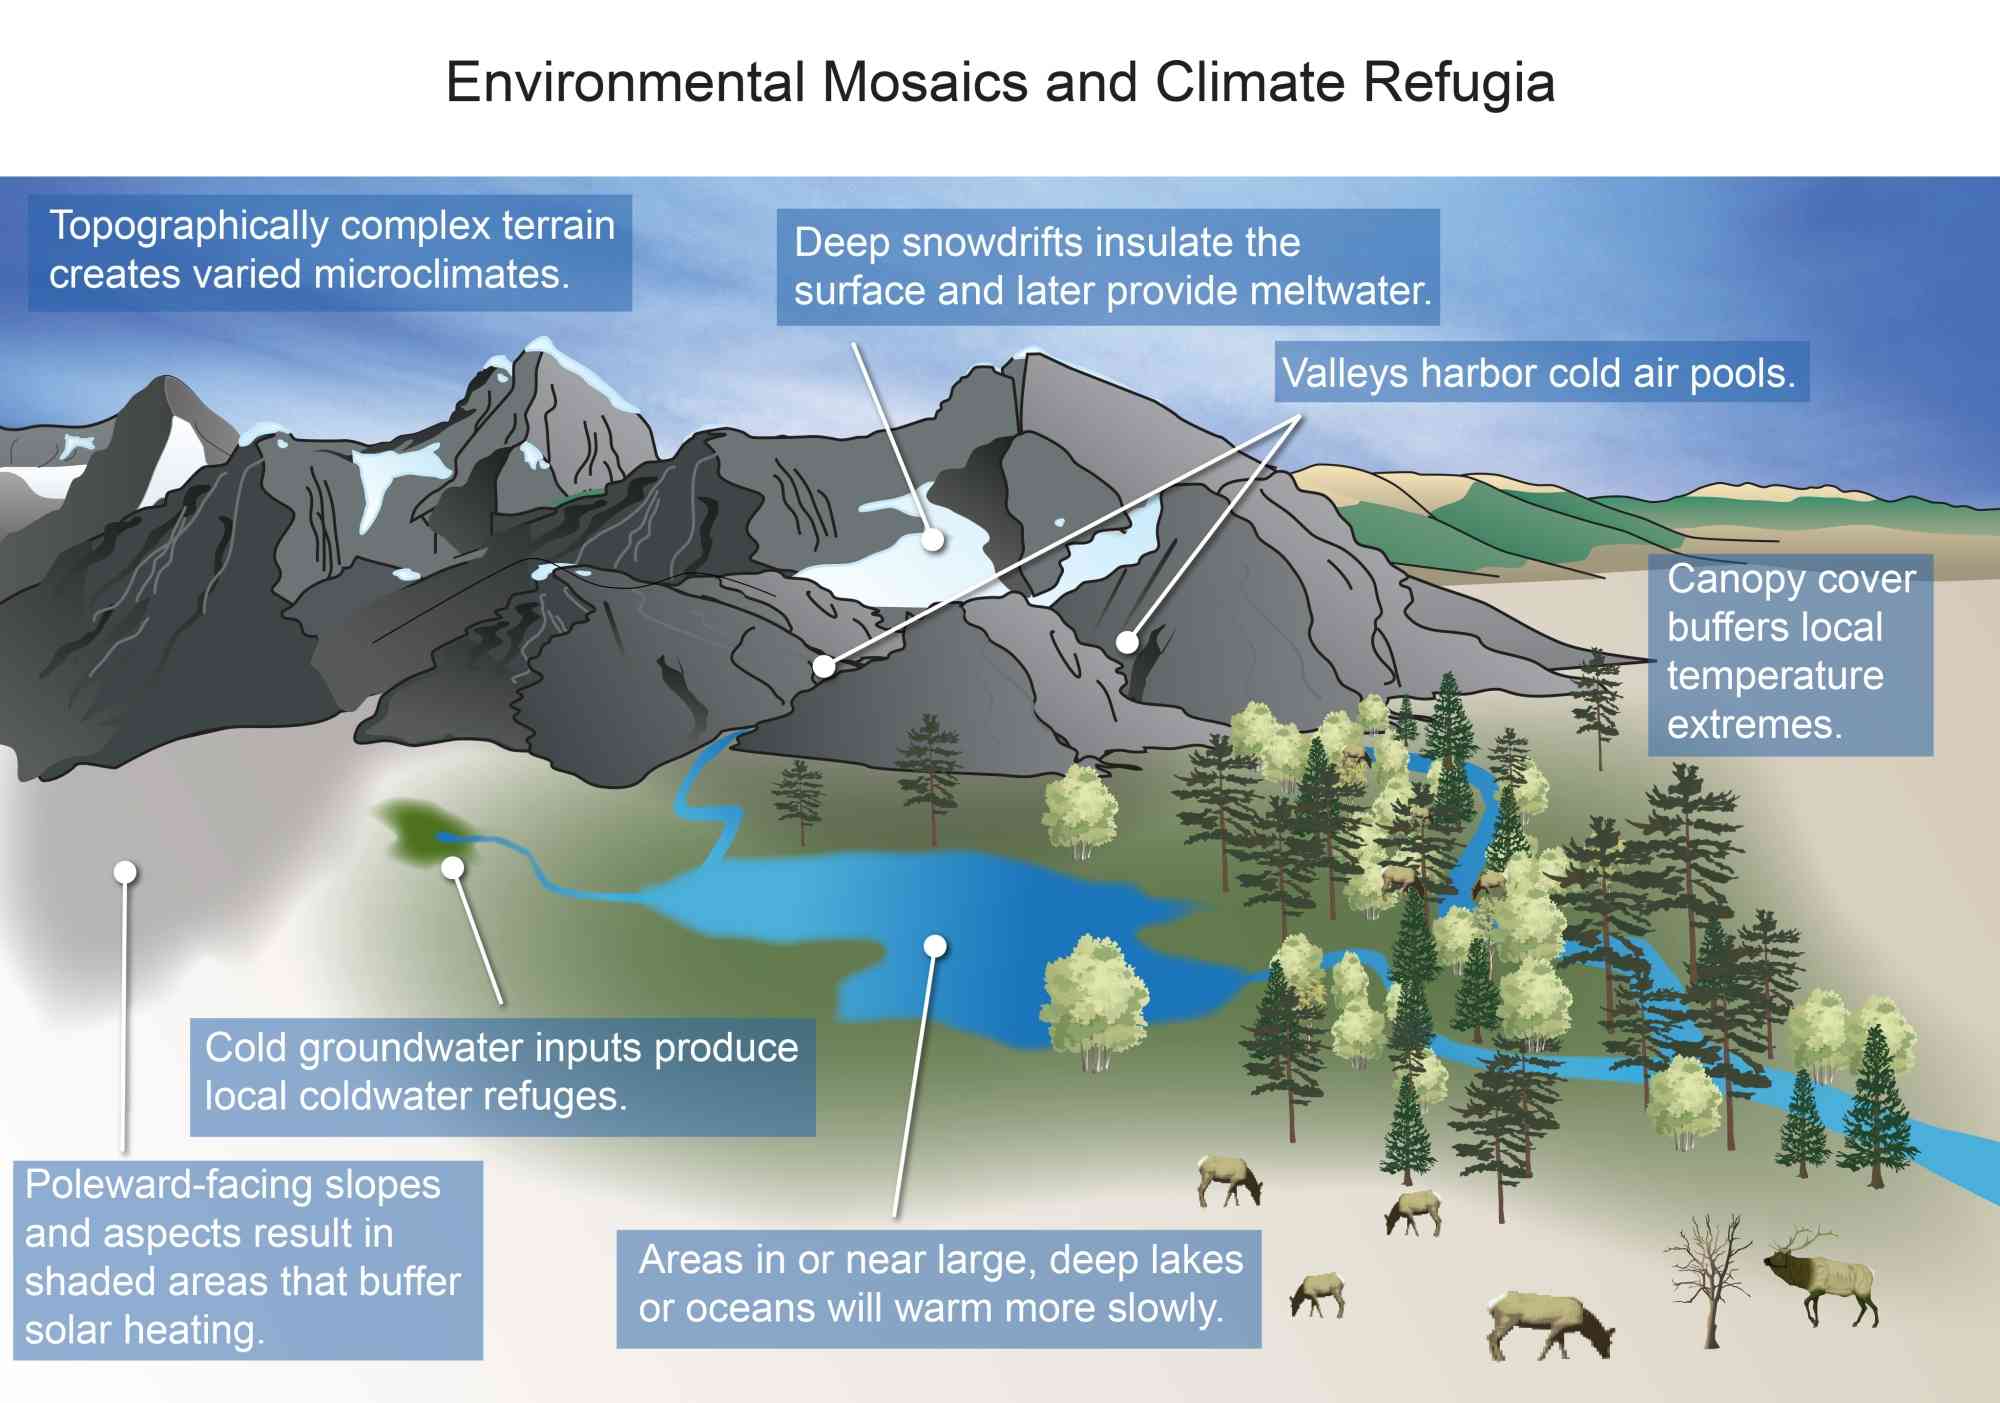 2024.01.11-Environmental Mosaics and Climate Refugia graphic-Crimmins, A.R., C.W. Avery, D.R. Easterling, K.E. Kunkel, B.C. Stewart, and T.K. Maycock, Eds. U.S. Global Change Research Program